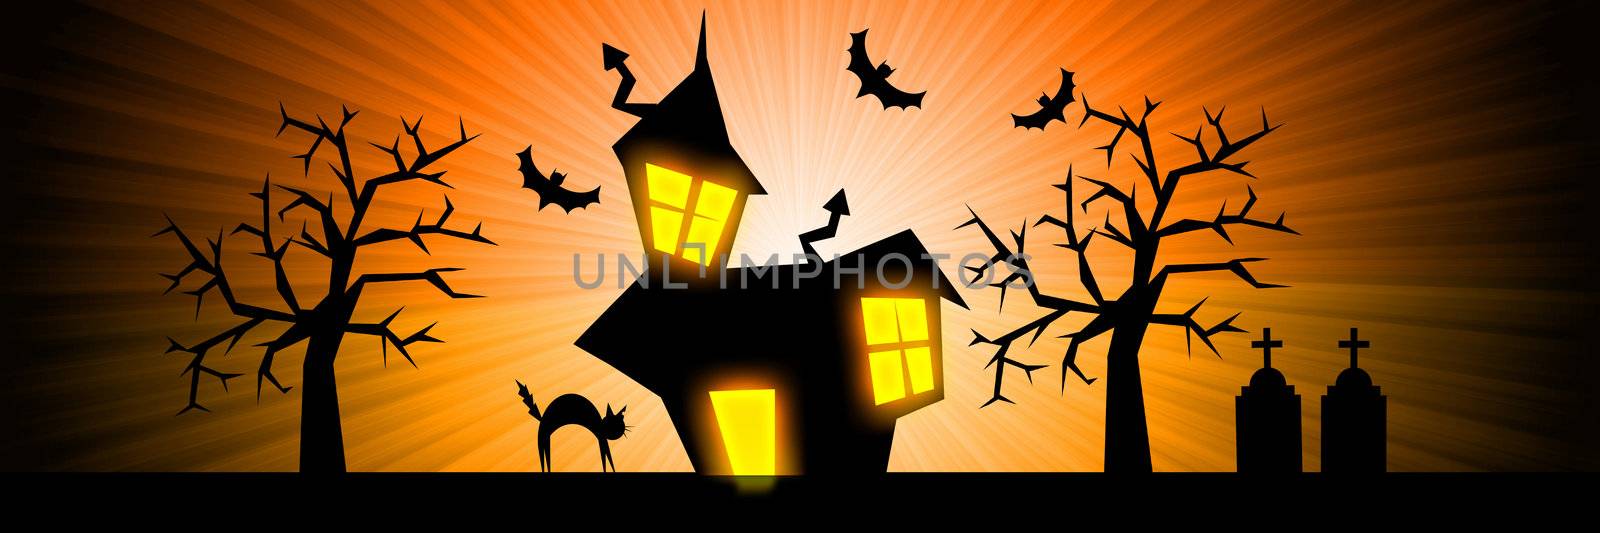 Terror night halloween orange banner background with house, cat, tombs and trees.